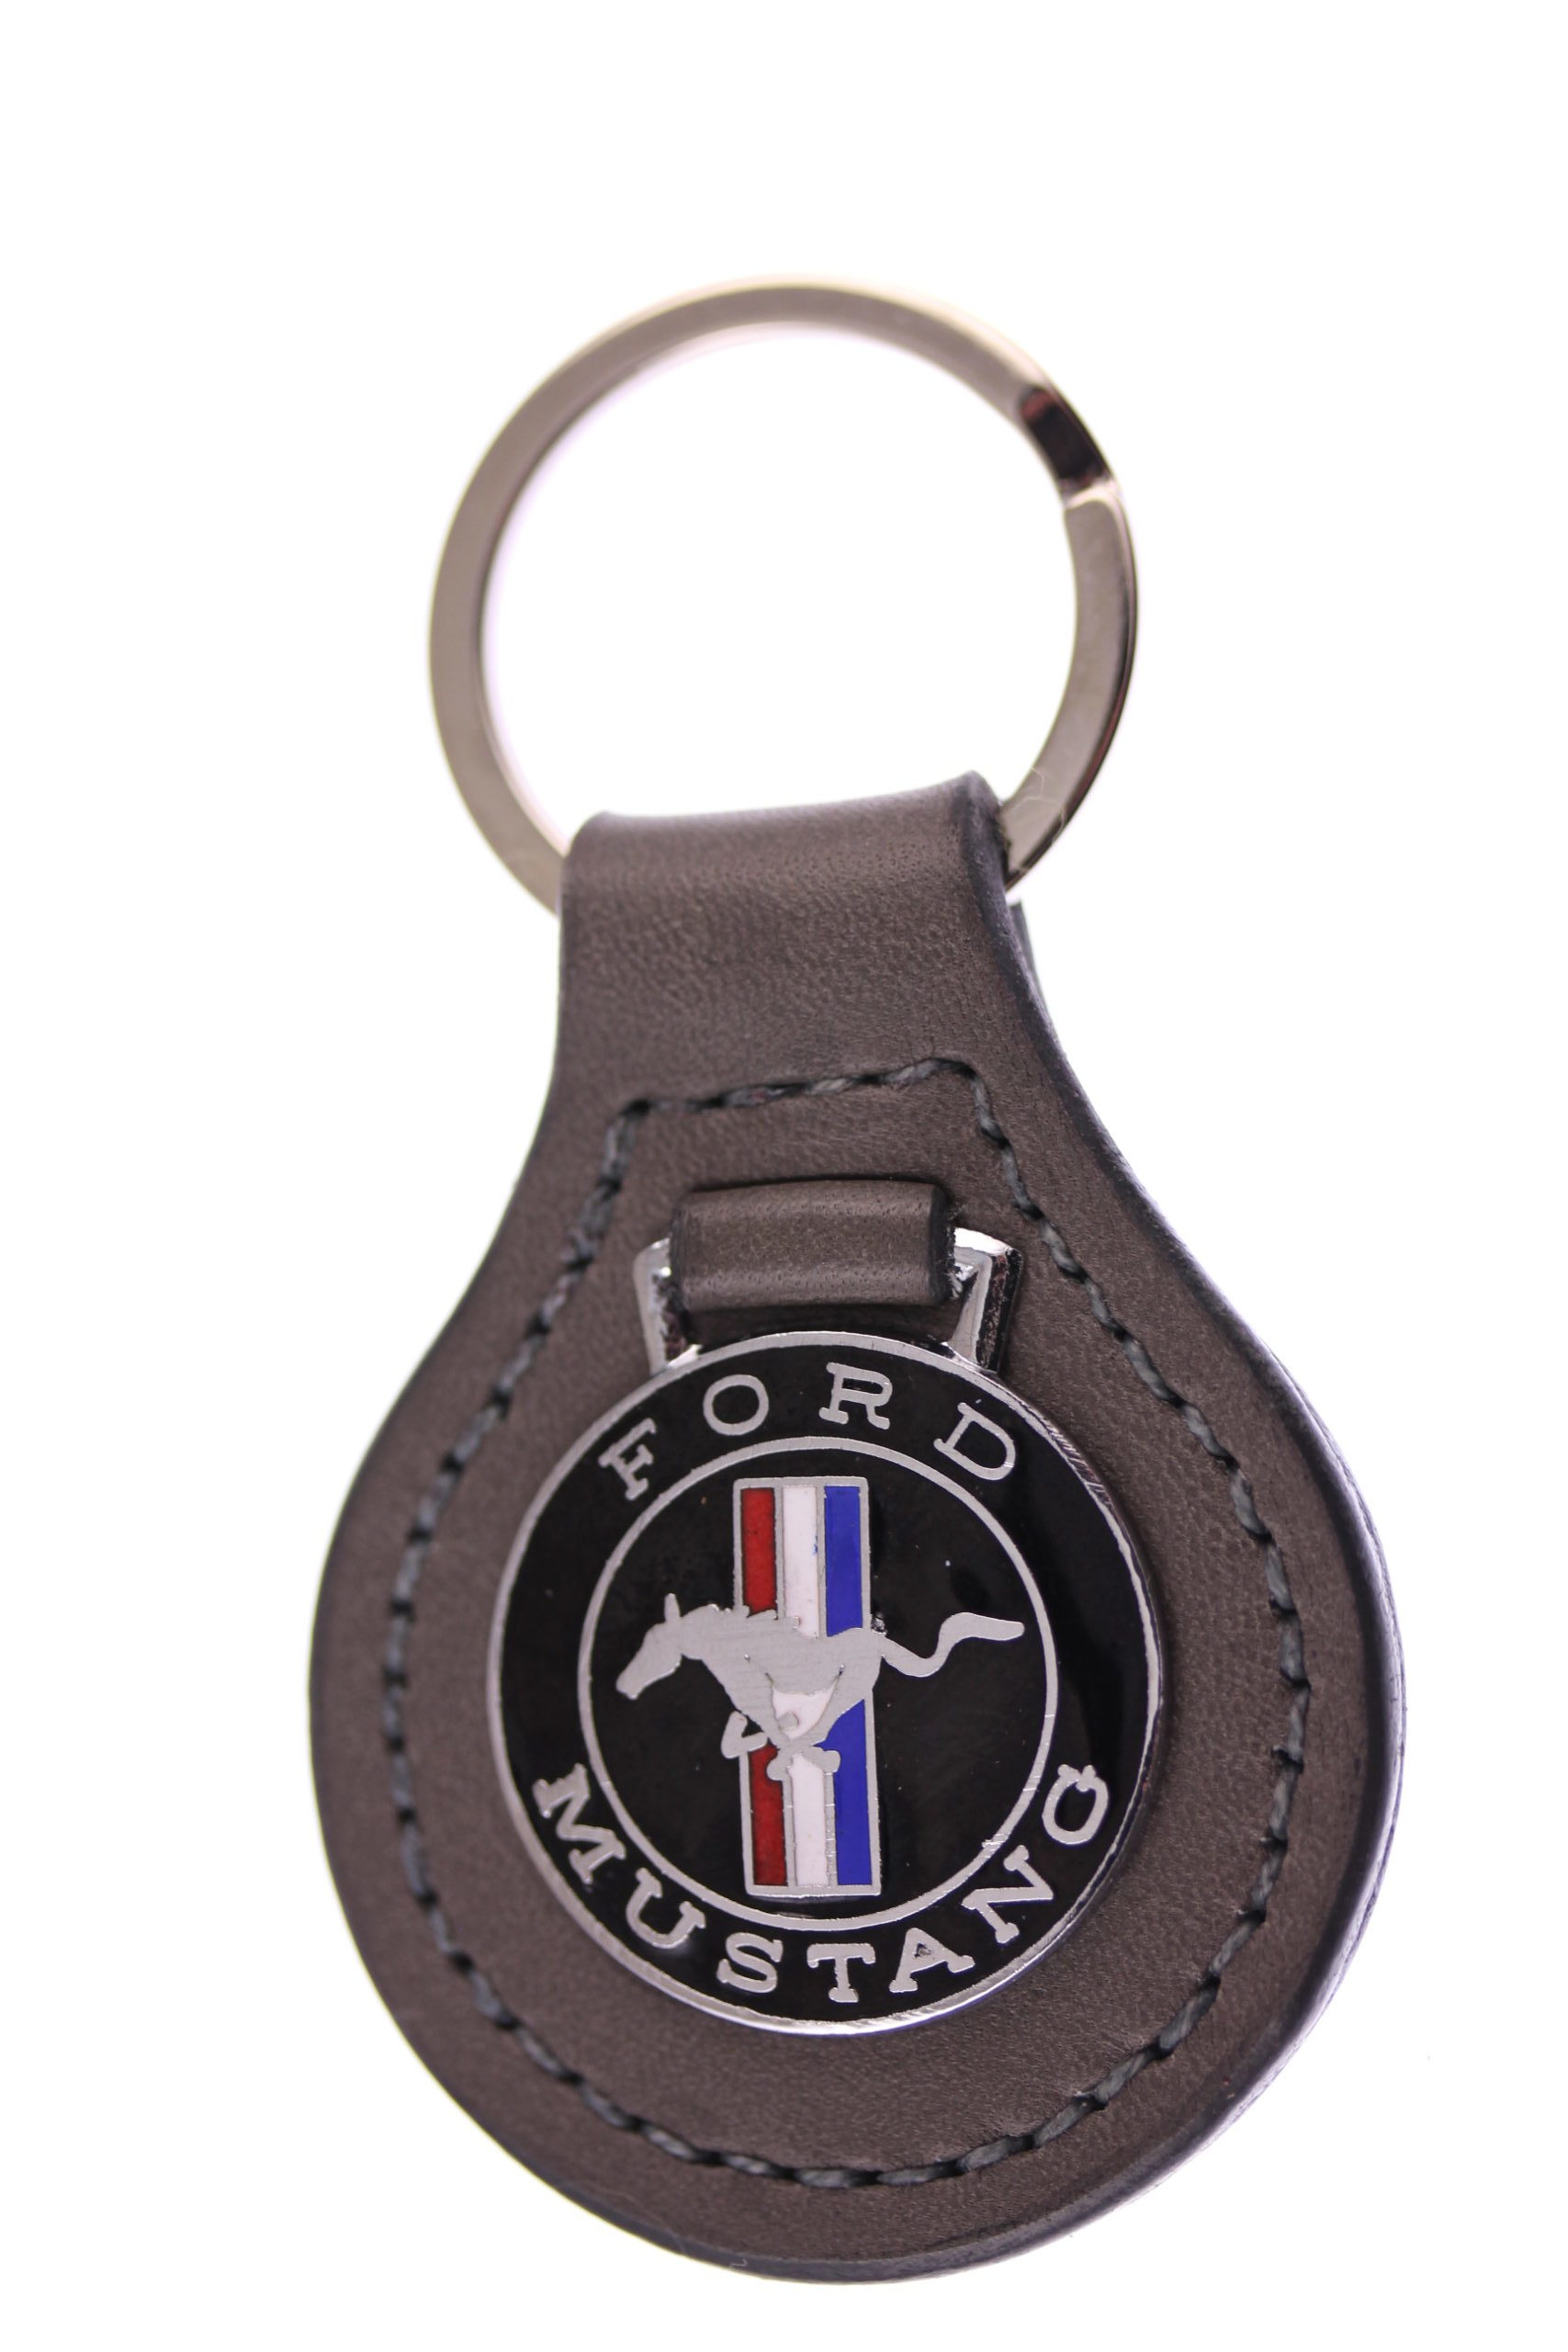 MUSTANG OWNERS KEY CHAIN 